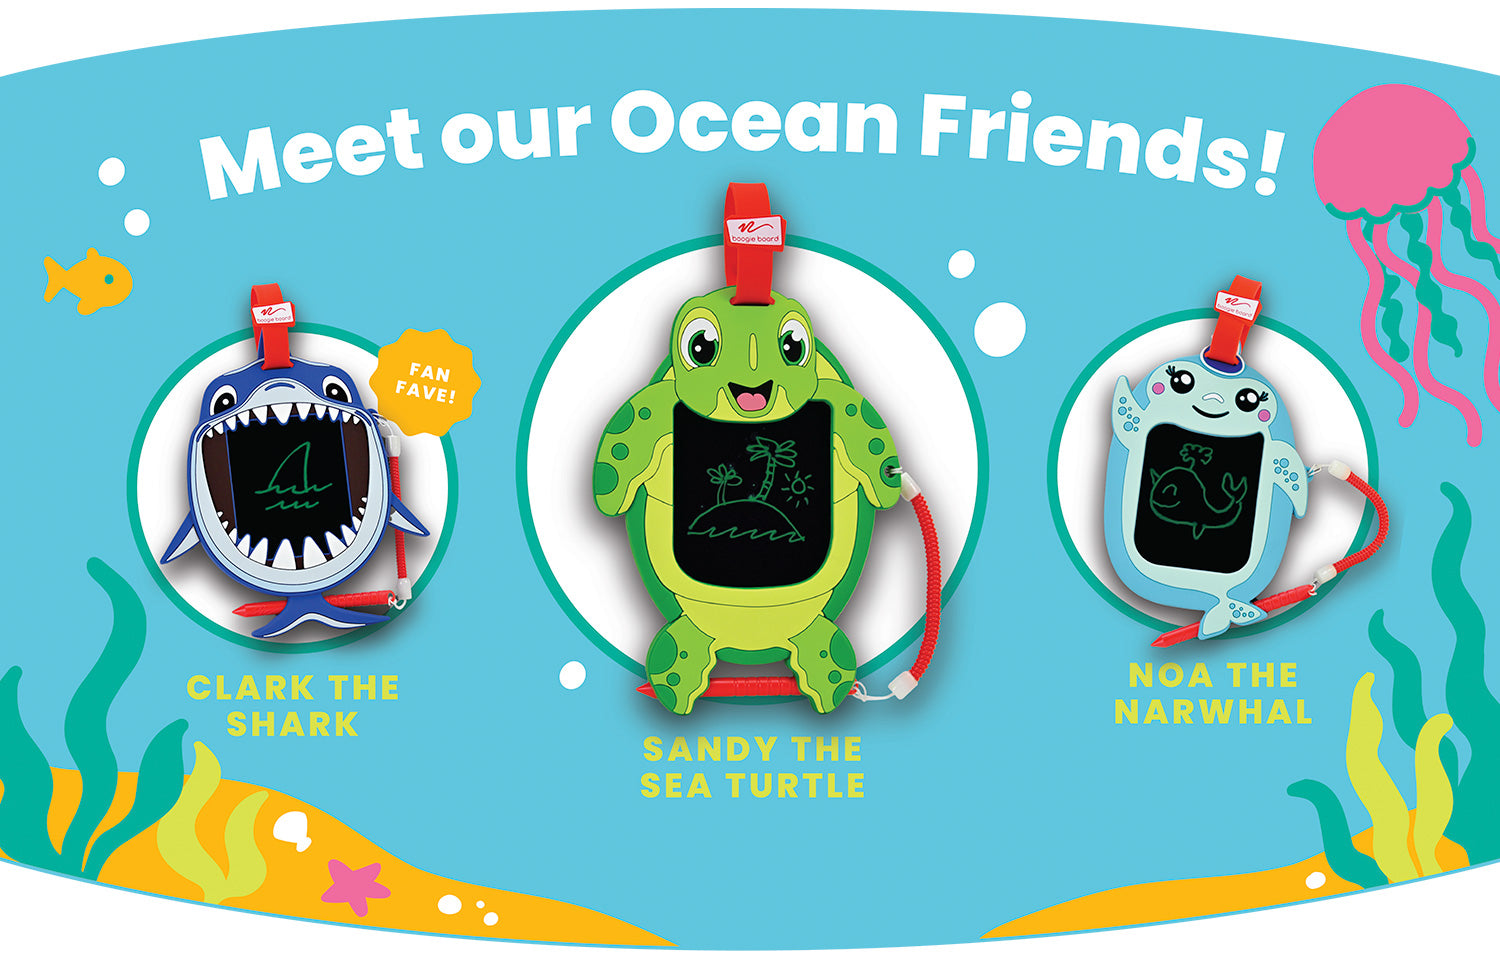 Meet our Ocean Friends! Animal drawing boards - Clark the Shark, Sandy the Sea Turtle and Noa the Narwhal doodle sketch